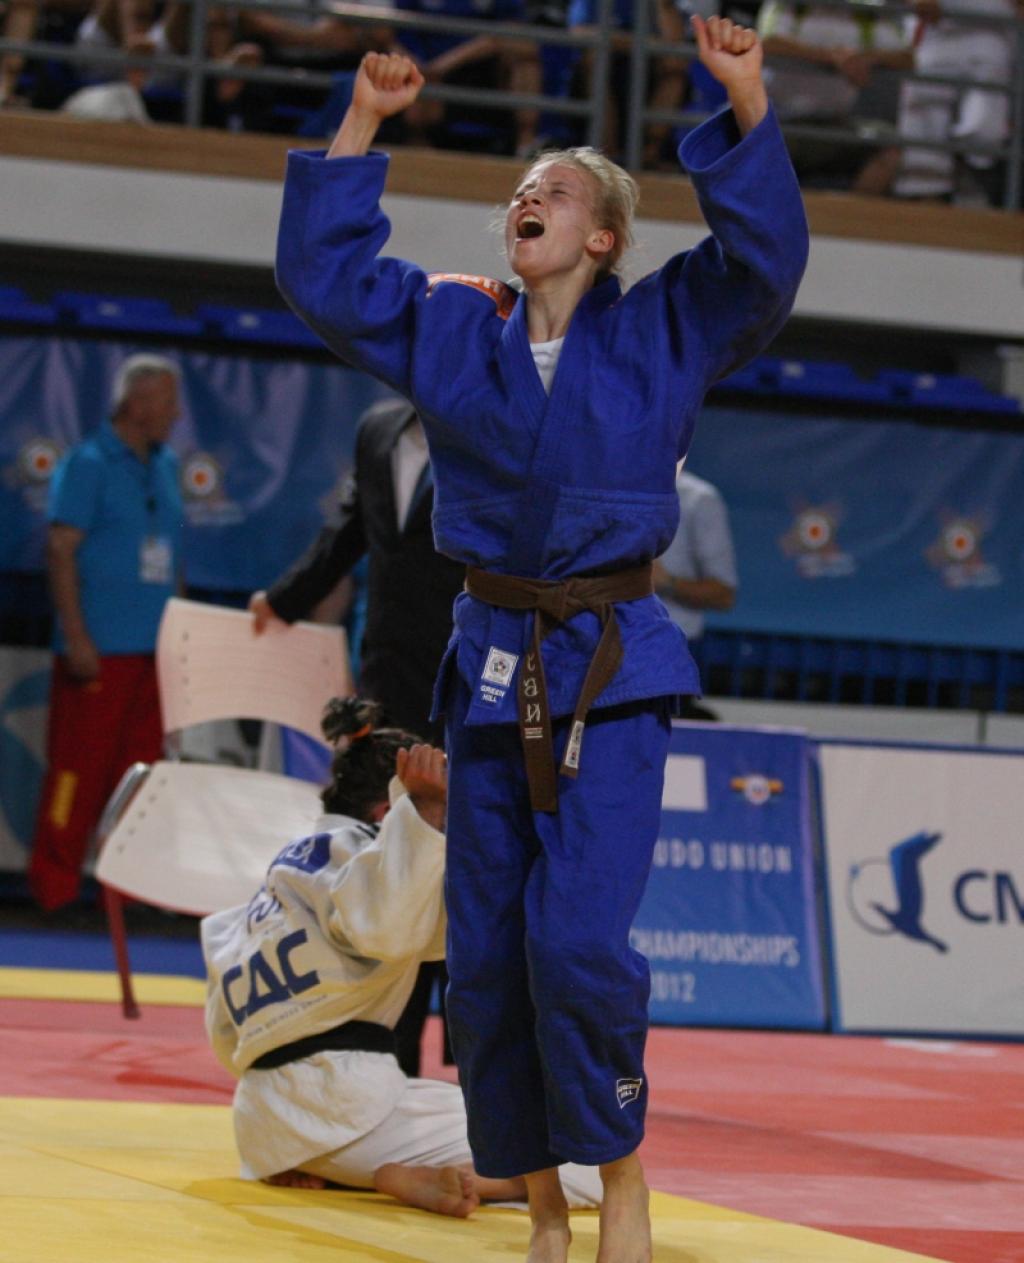 Strong and new medallists at European Championships for Cadets